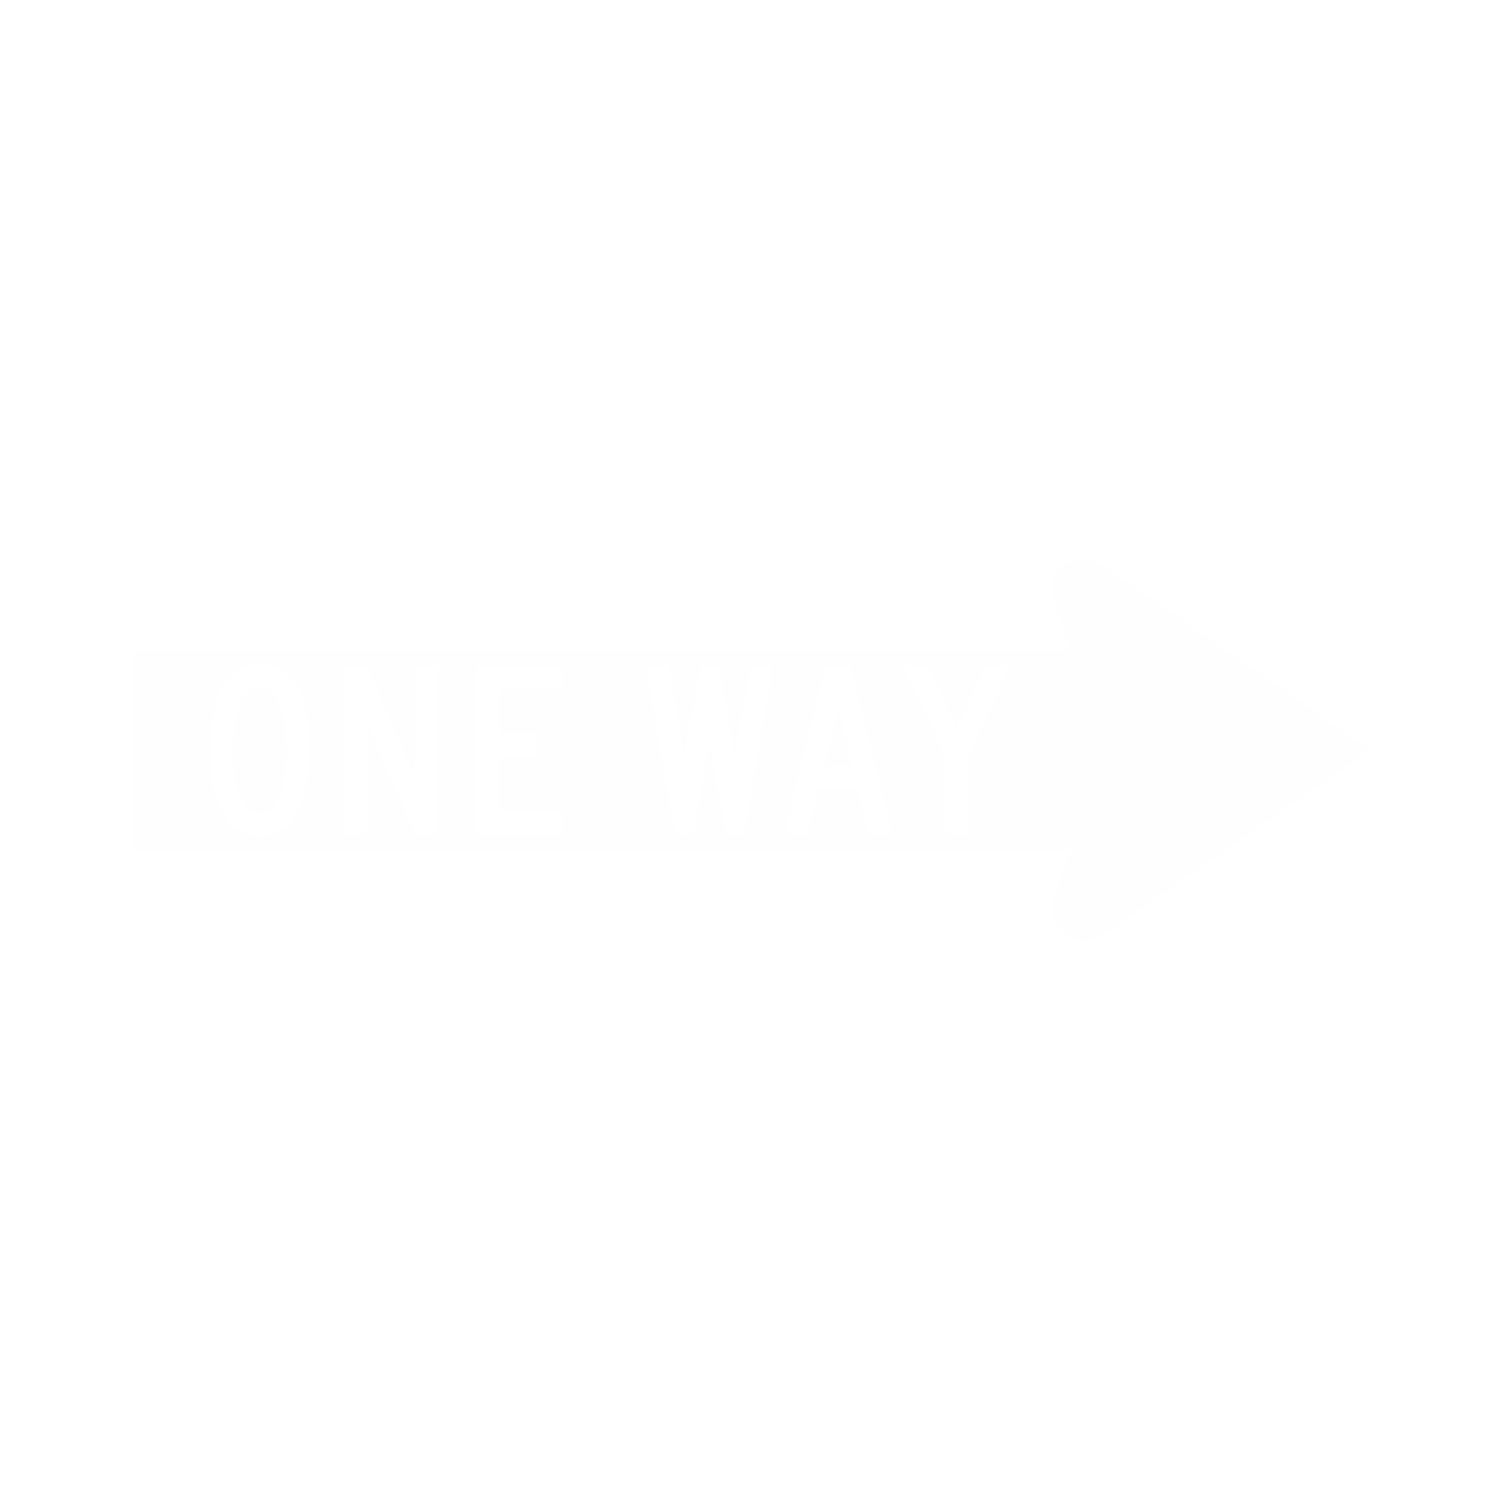 One Way Directional Parking Sign